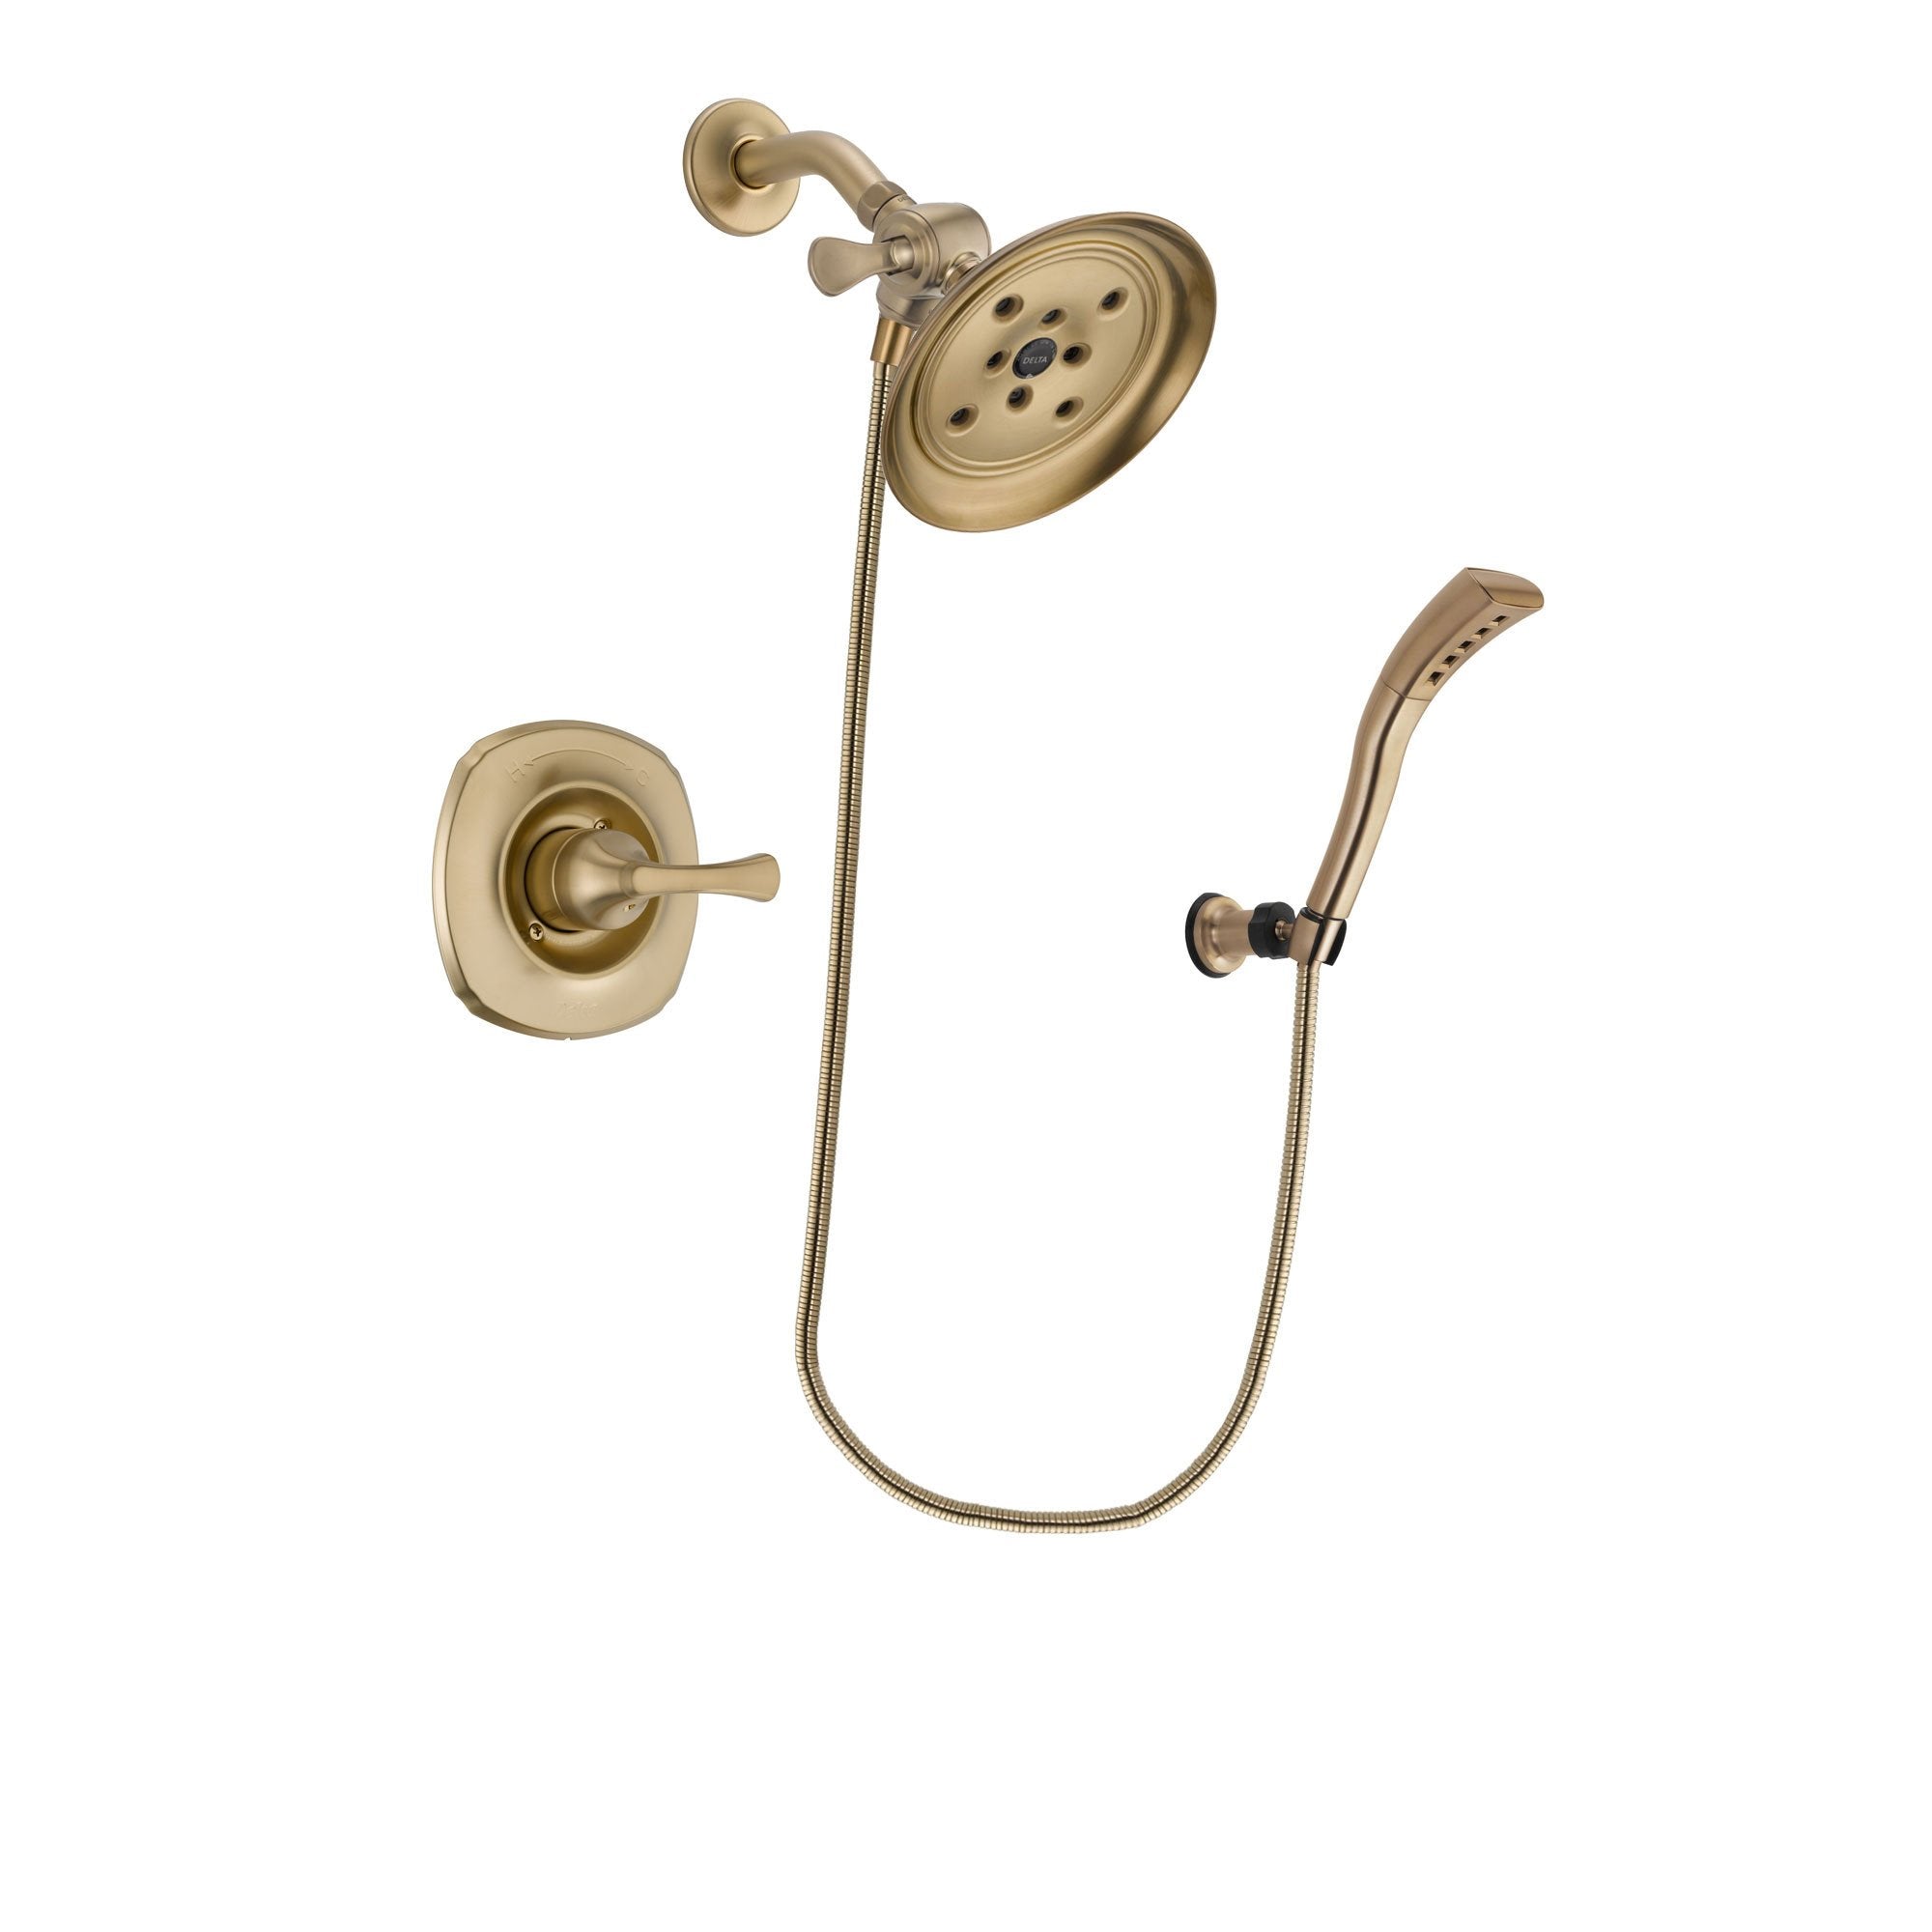 Delta Addison Champagne Bronze Finish Shower Faucet System Package with Large Rain Shower Head and Modern Wall Mount Personal Handheld Shower Spray Includes Rough-in Valve DSP3694V